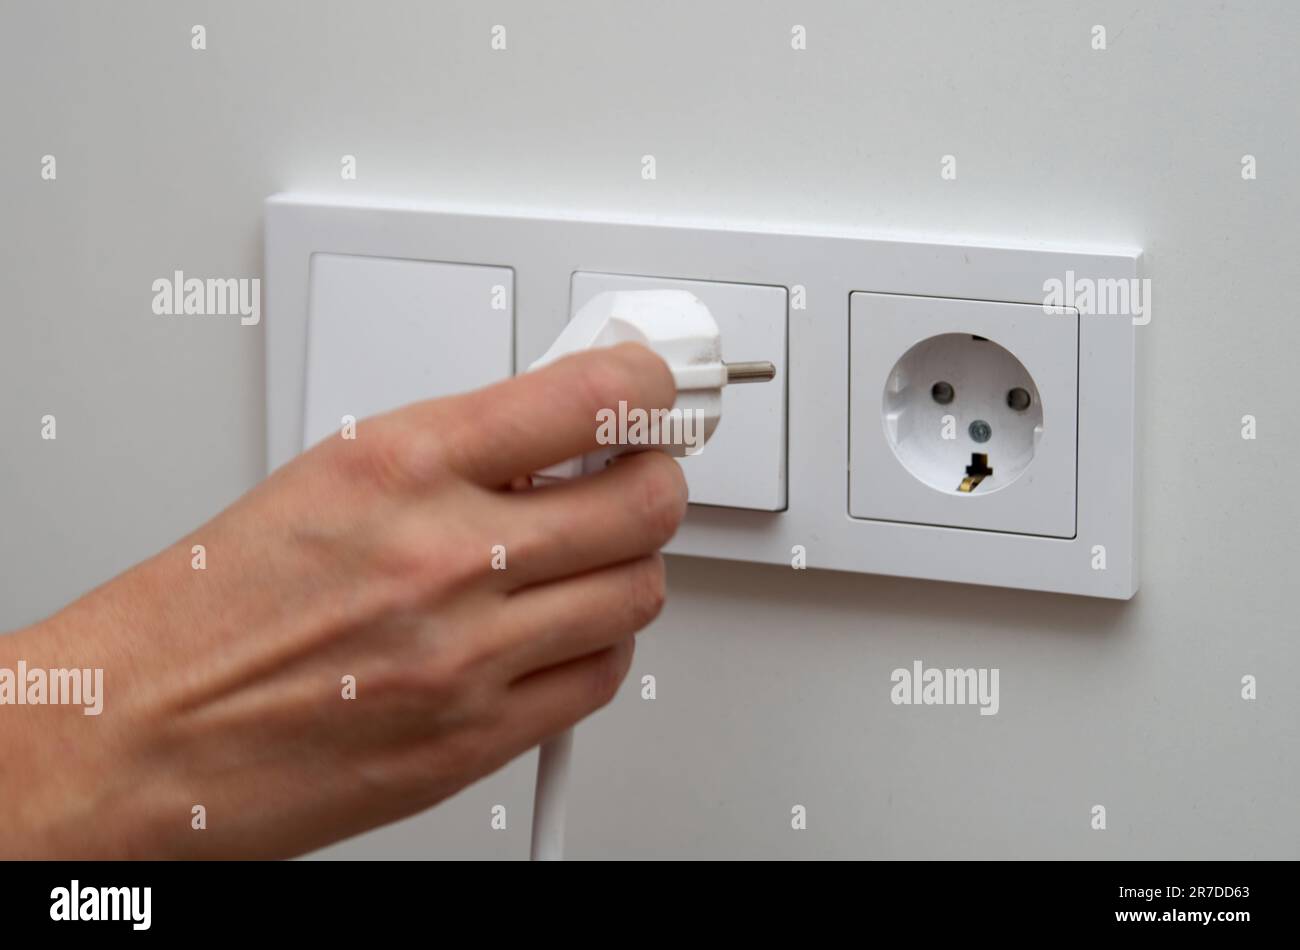 Woman's hand plugs an electric plug into a socket Stock Photo